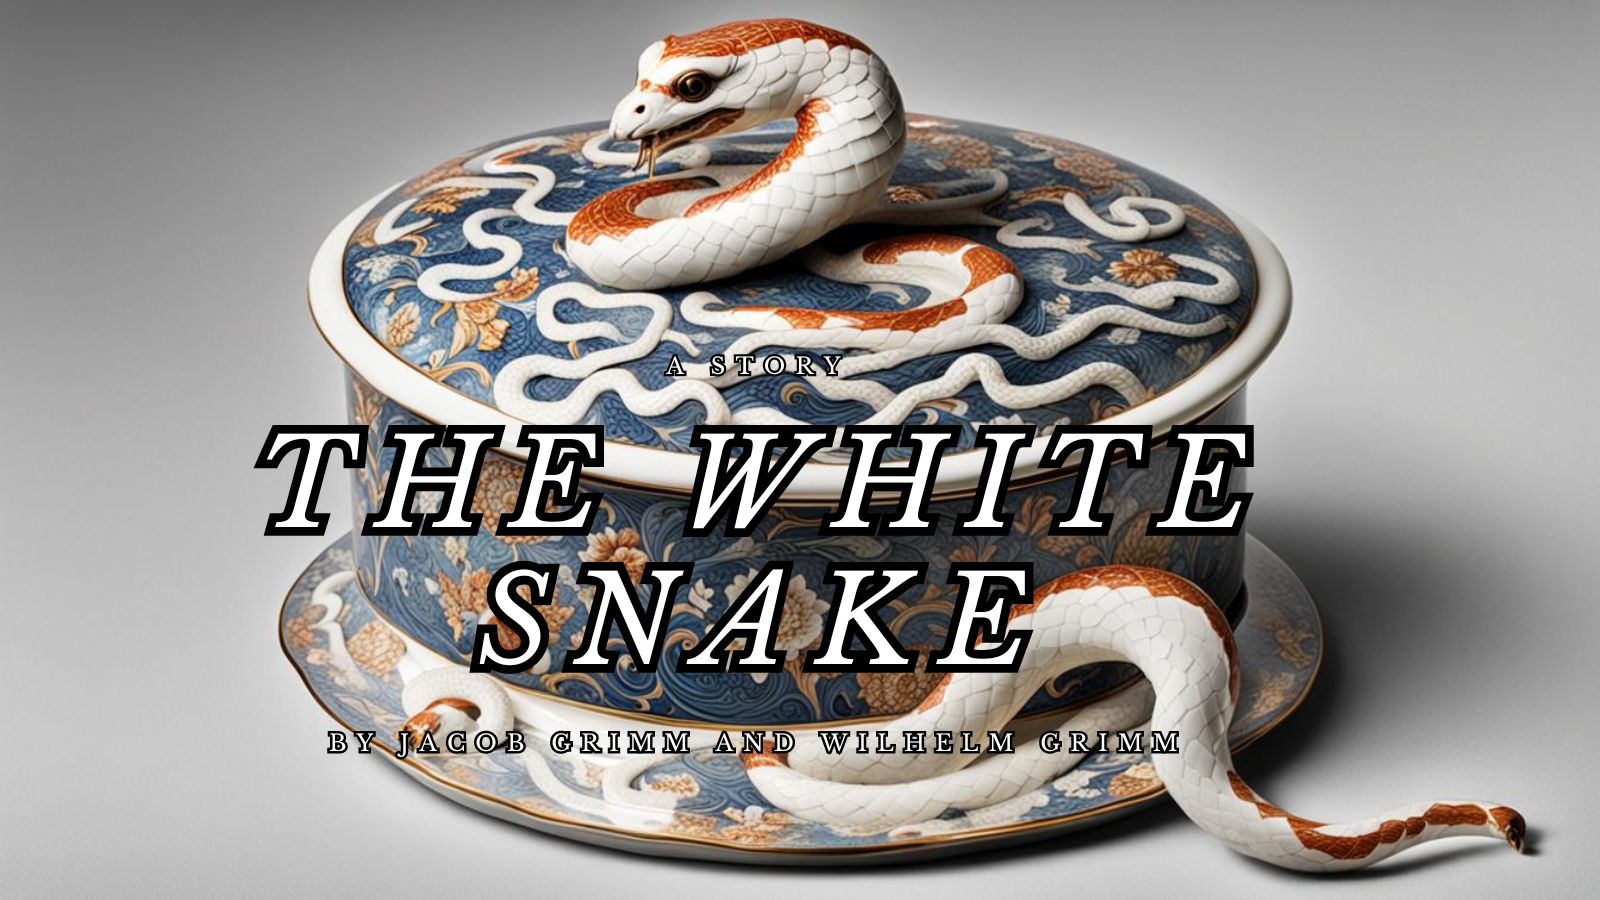 The White Snake by Jacob Grimm and Wilhelm Grimm